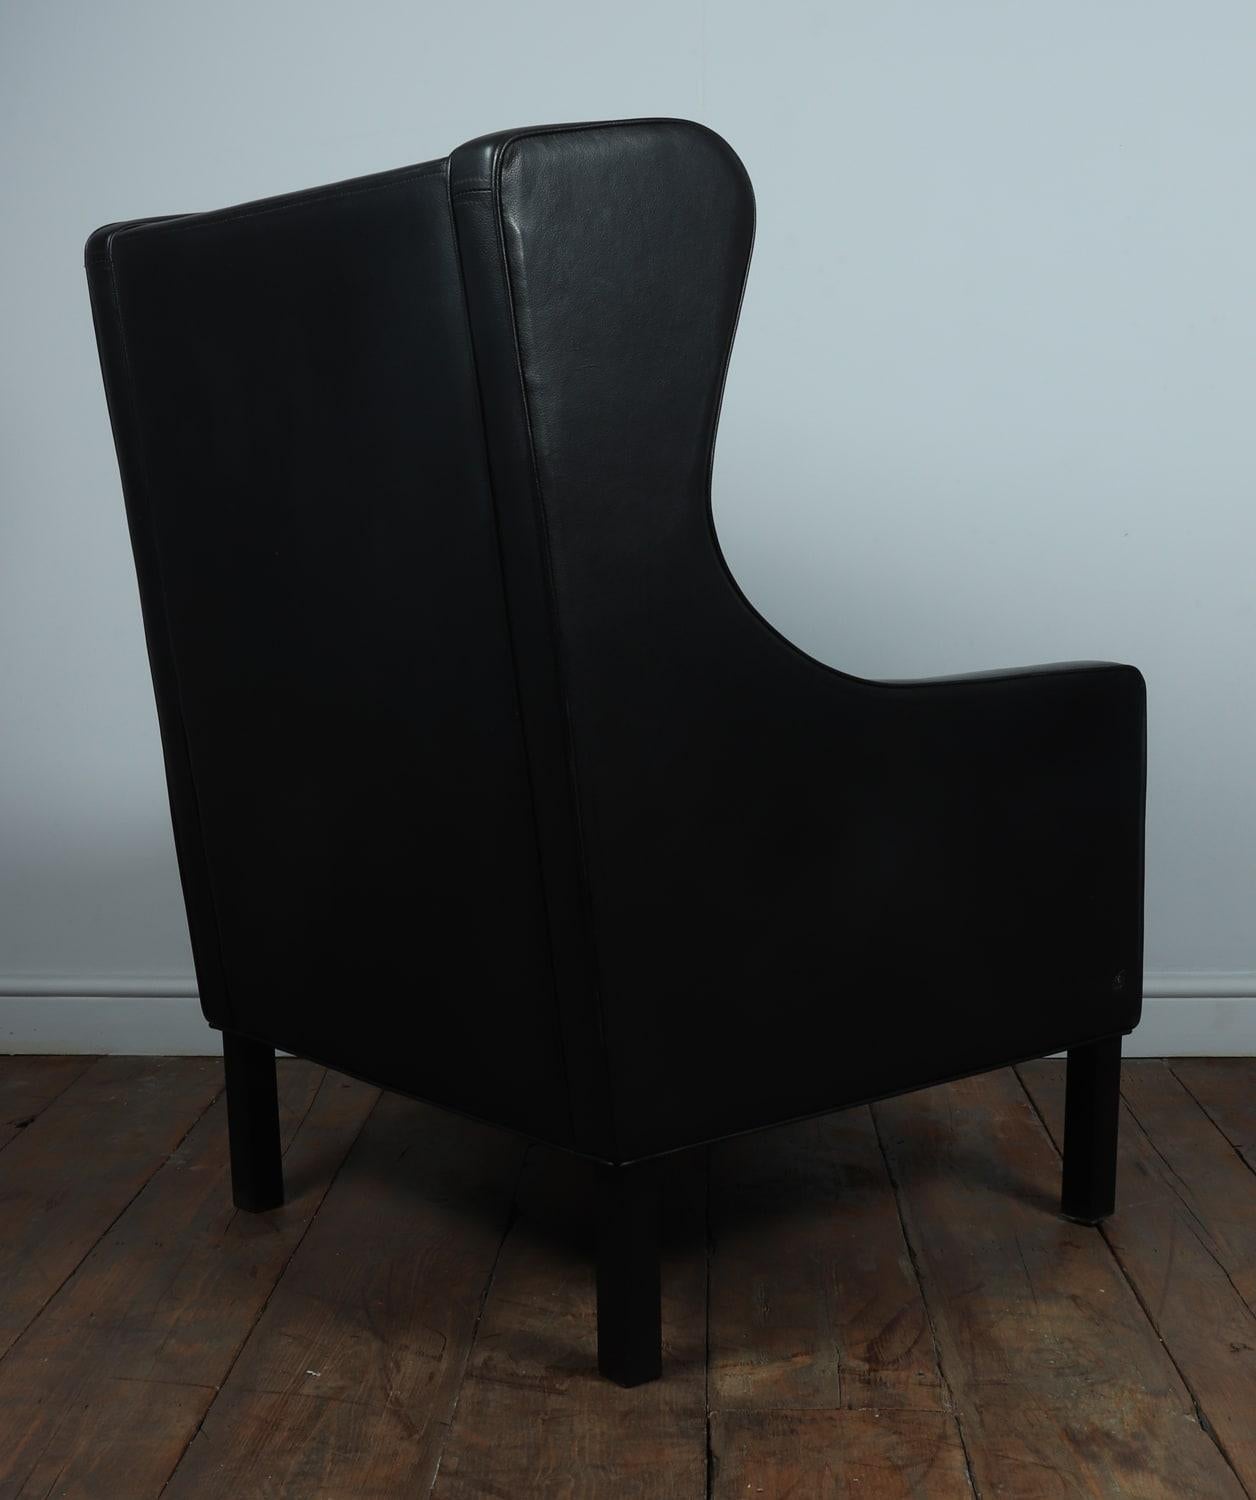 Danish, Mid-Century Modern, Wing Chair in Black Leather by Hurup, circa 1980 For Sale 5